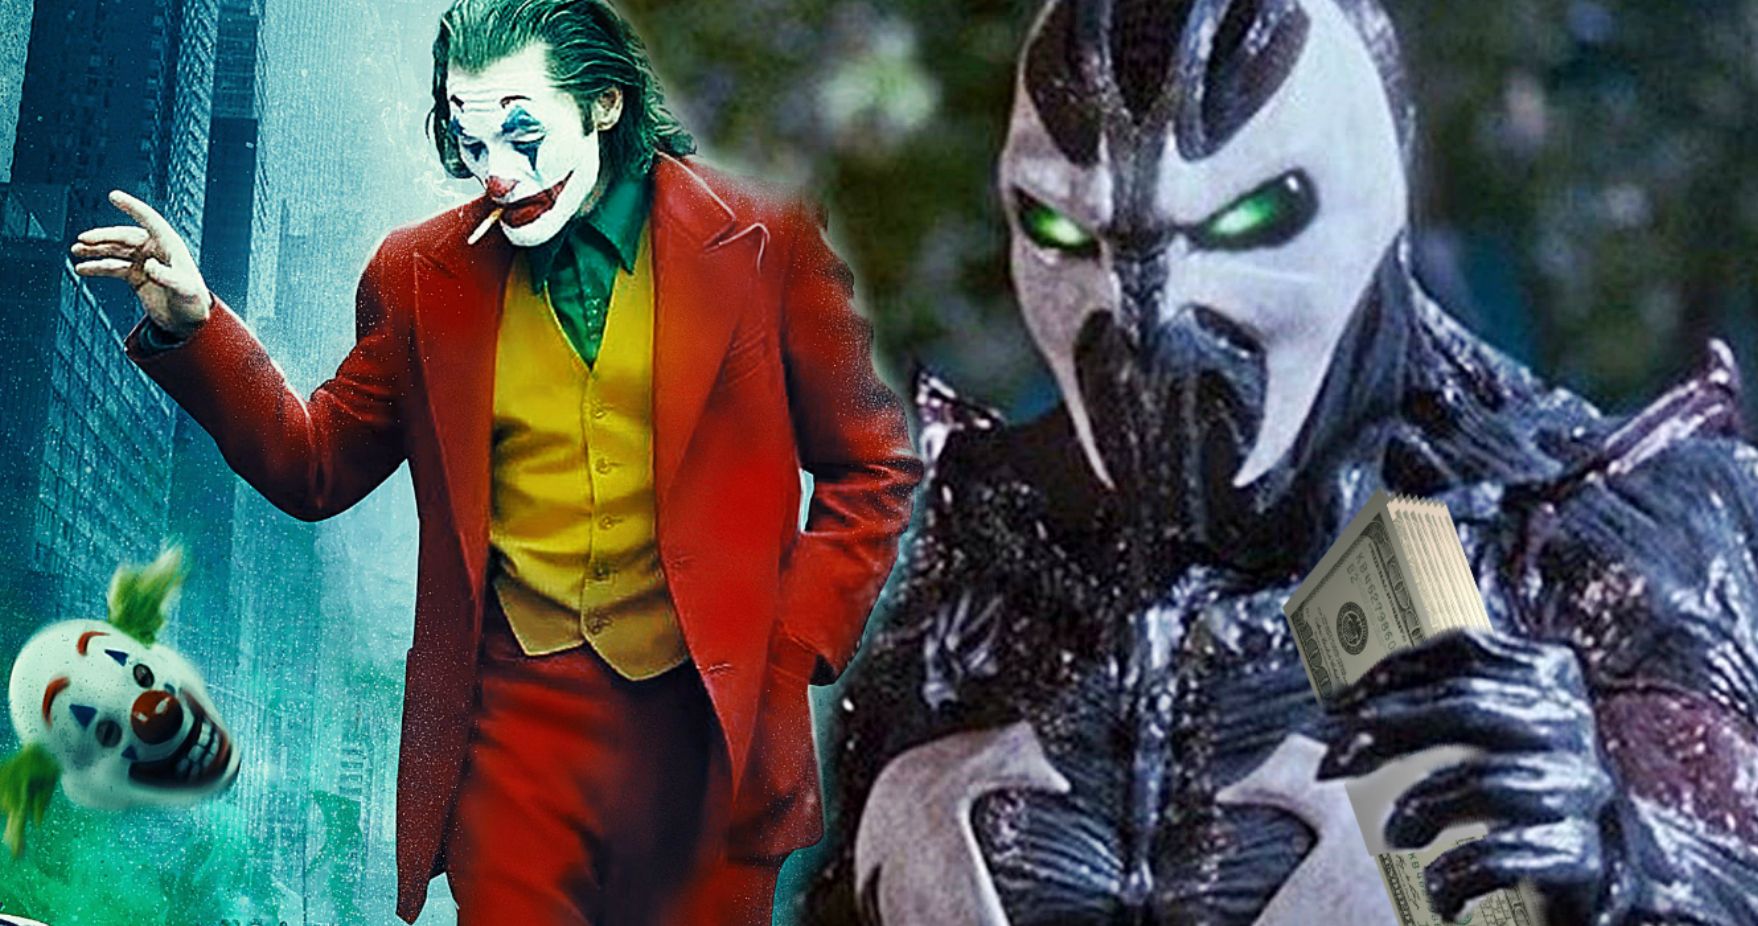 Spawn Reboot May Finally Get Going Thanks to Joker Success